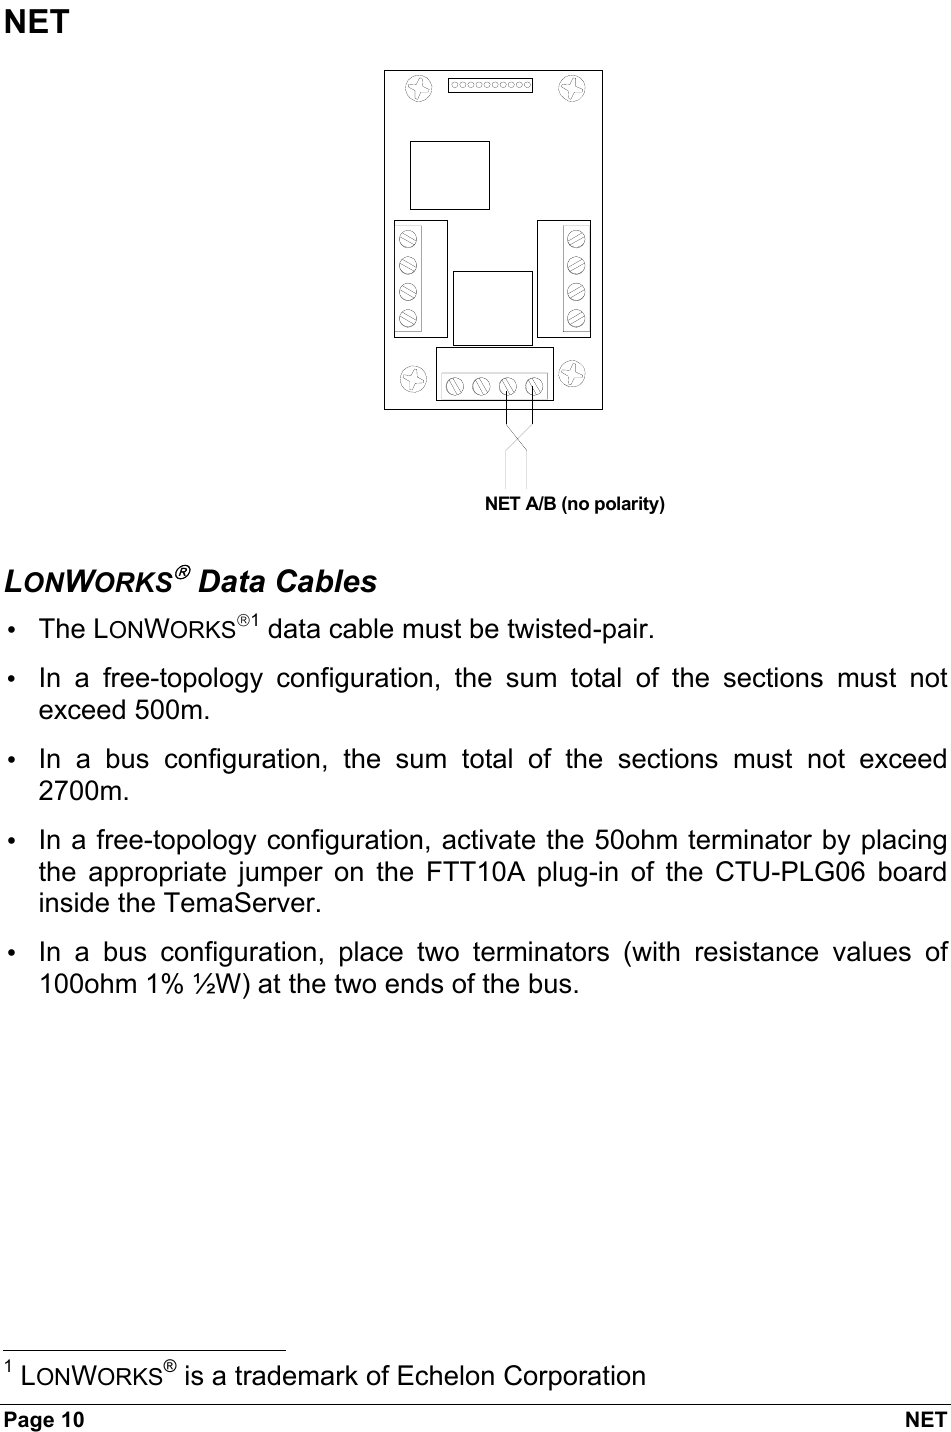 Page 10  NET NET NET A/B (no polarity)  LONWORKS Data Cables • The LONWORKS1 data cable must be twisted-pair. •  In a free-topology configuration, the sum total of the sections must not exceed 500m. •  In a bus configuration, the sum total of the sections must not exceed 2700m. •  In a free-topology configuration, activate the 50ohm terminator by placing the appropriate jumper on the FTT10A plug-in of the CTU-PLG06 board inside the TemaServer. •  In a bus configuration, place two terminators (with resistance values of 100ohm 1% ½W) at the two ends of the bus.                                                             1 LONWORKS® is a trademark of Echelon Corporation 